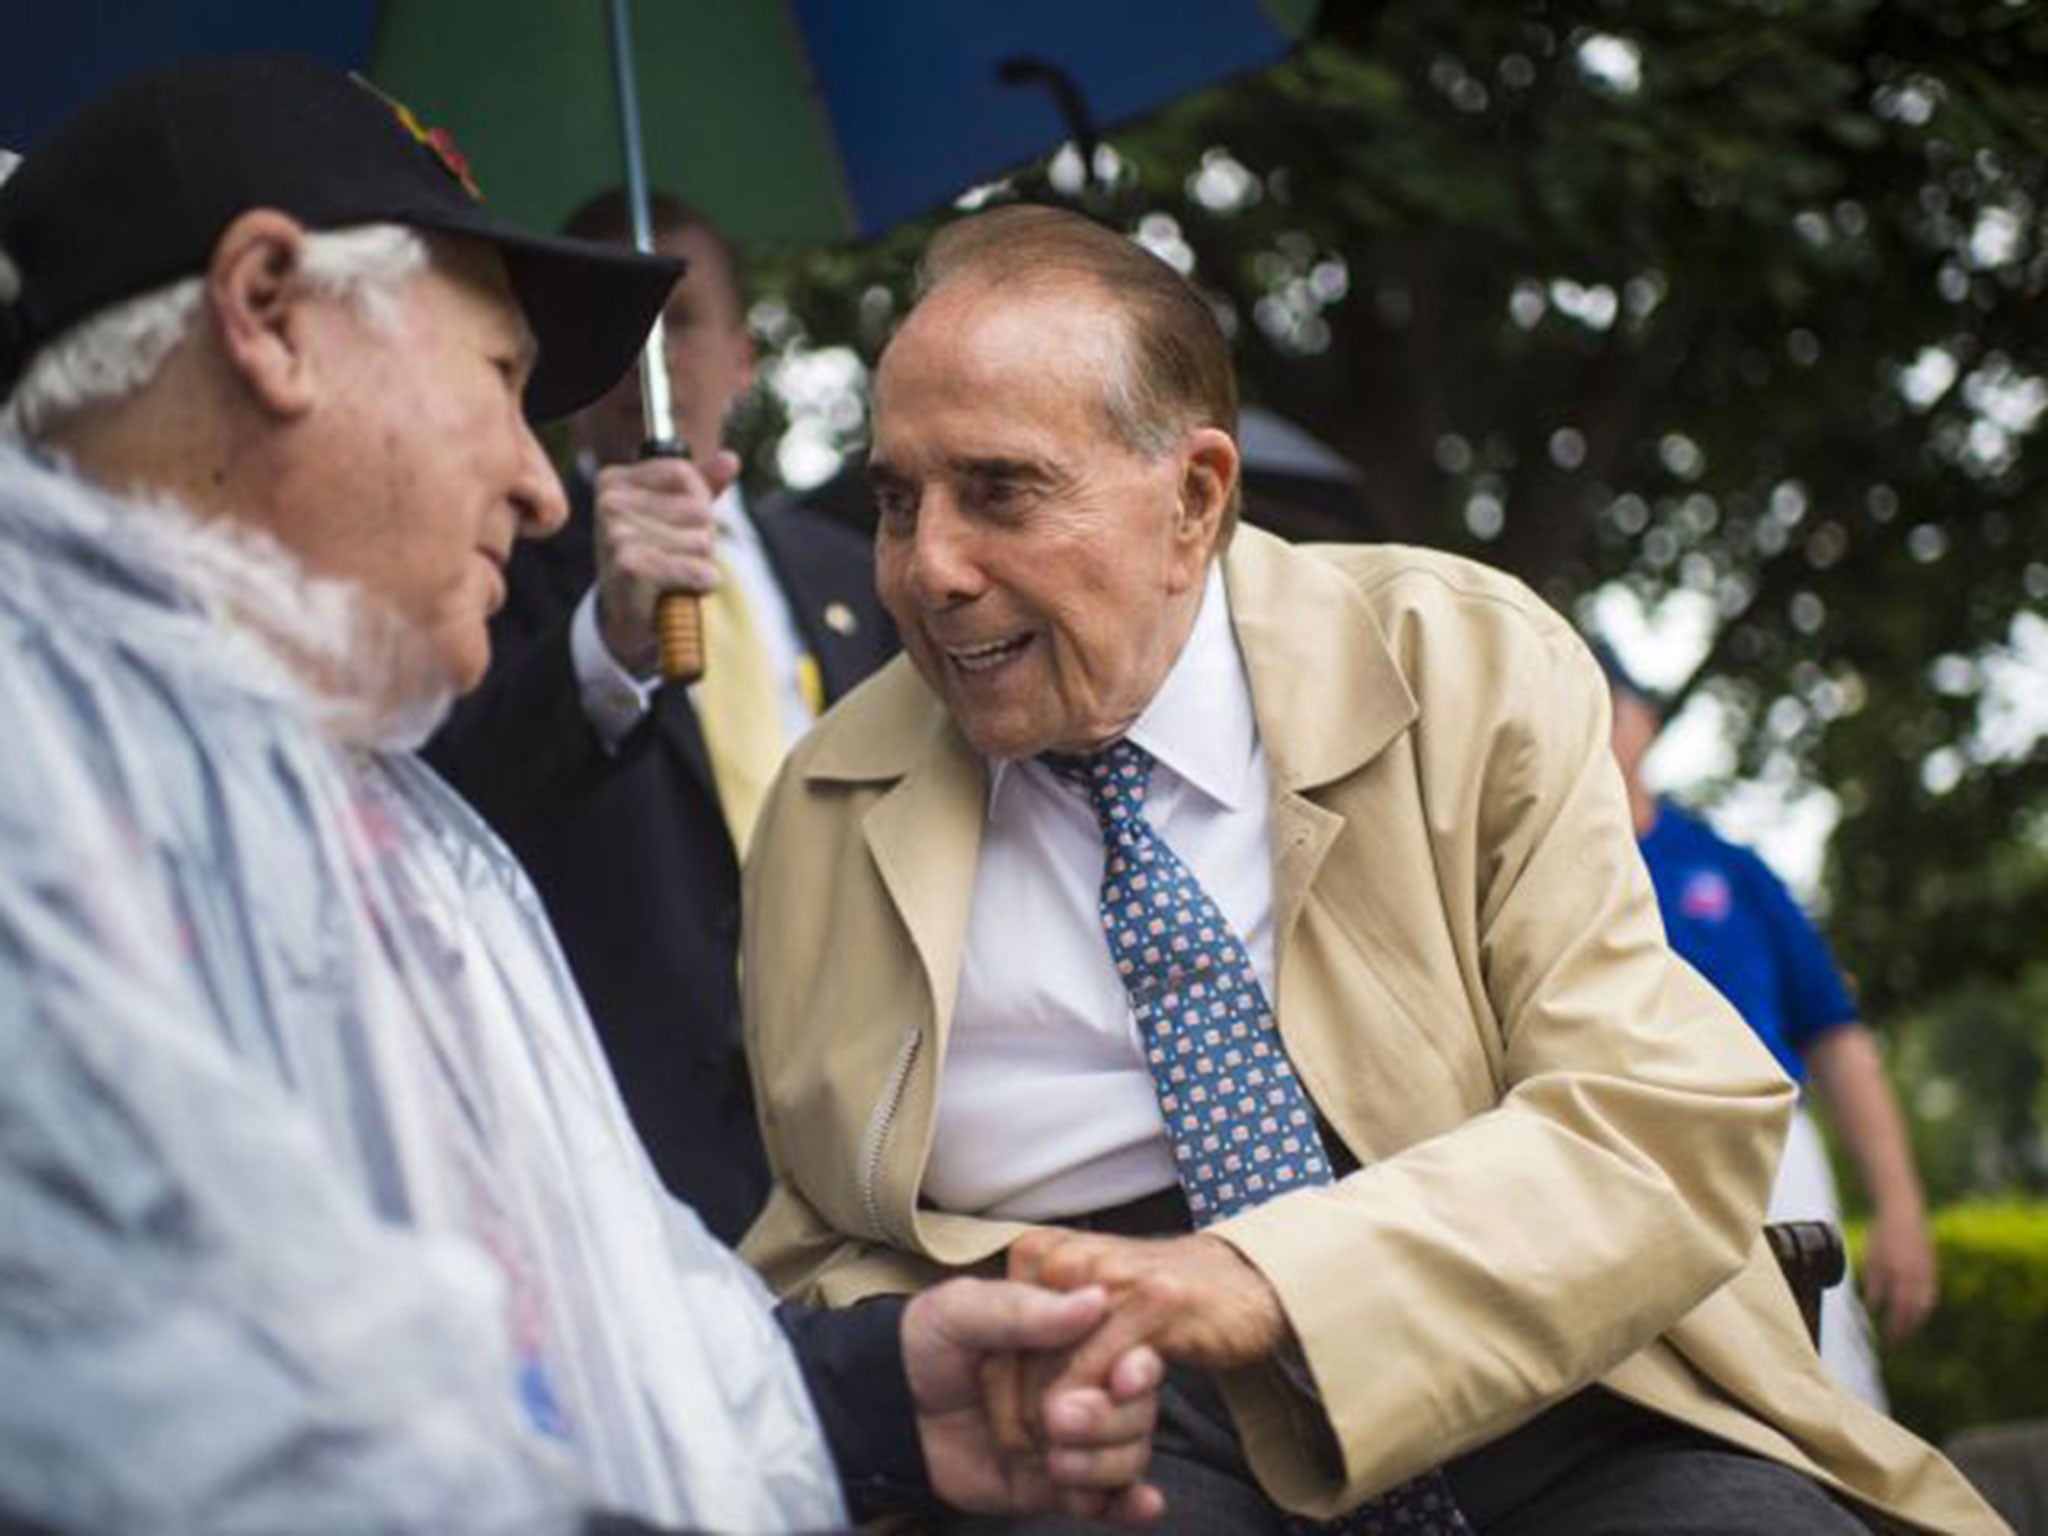 Former senator and World War II veteran Bob Dole, who served under Dwight D. Eisenhower, greets veterans and tourists at the National WW II Memorial to try and raise awareness for a possible Eisenhower Memorial